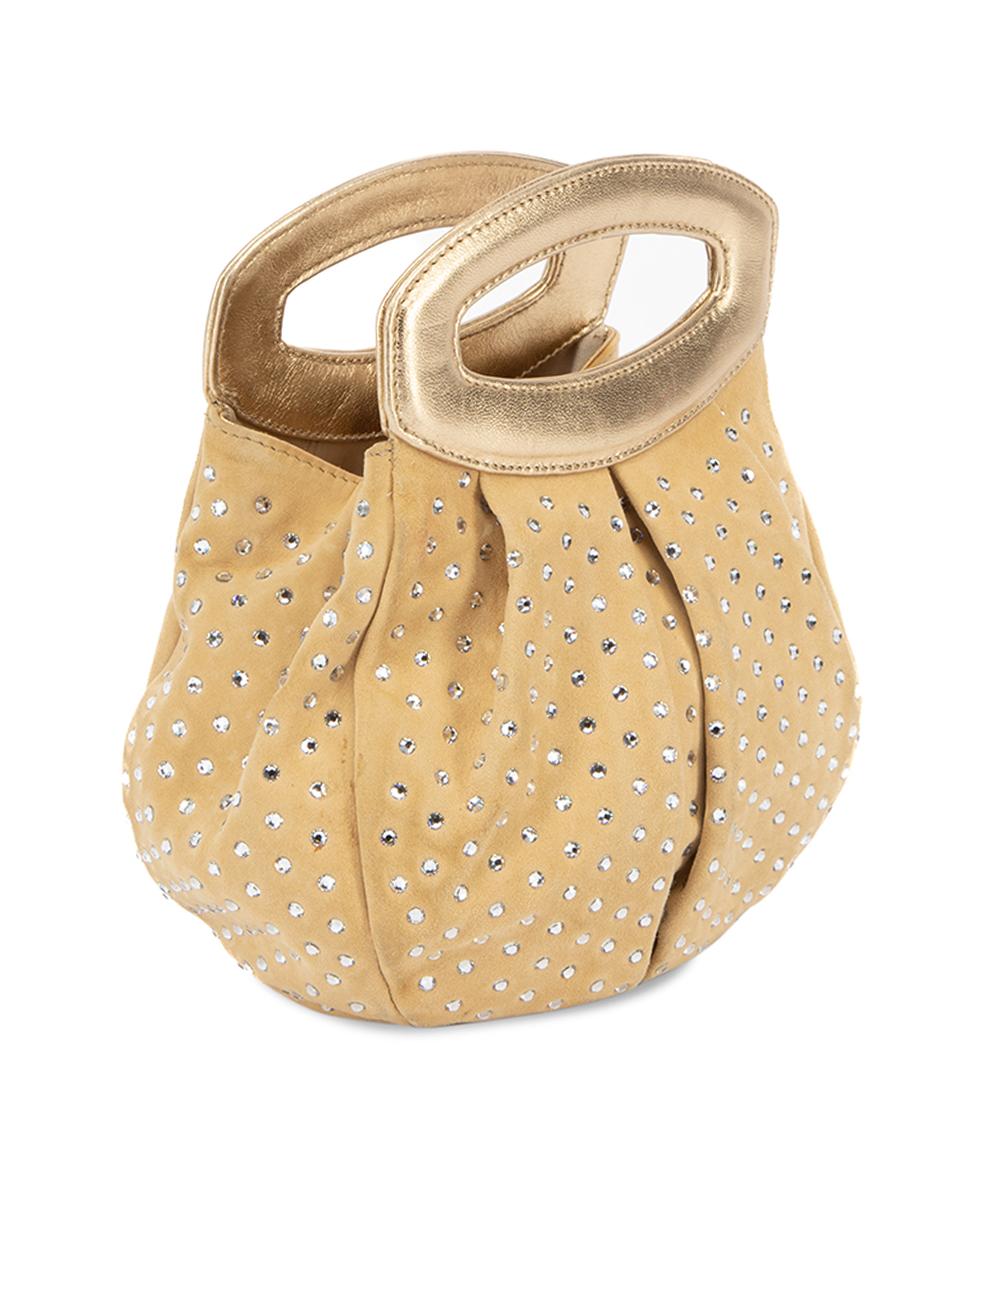 CONDITION is Very good. Minimal wear to bag is evident. Some light pilling to suede material and marks can be seen to the right side on this used Giuseppe Zanotti designer resale item.  This item includes the original dustbag.
 
 Details
  Beige
